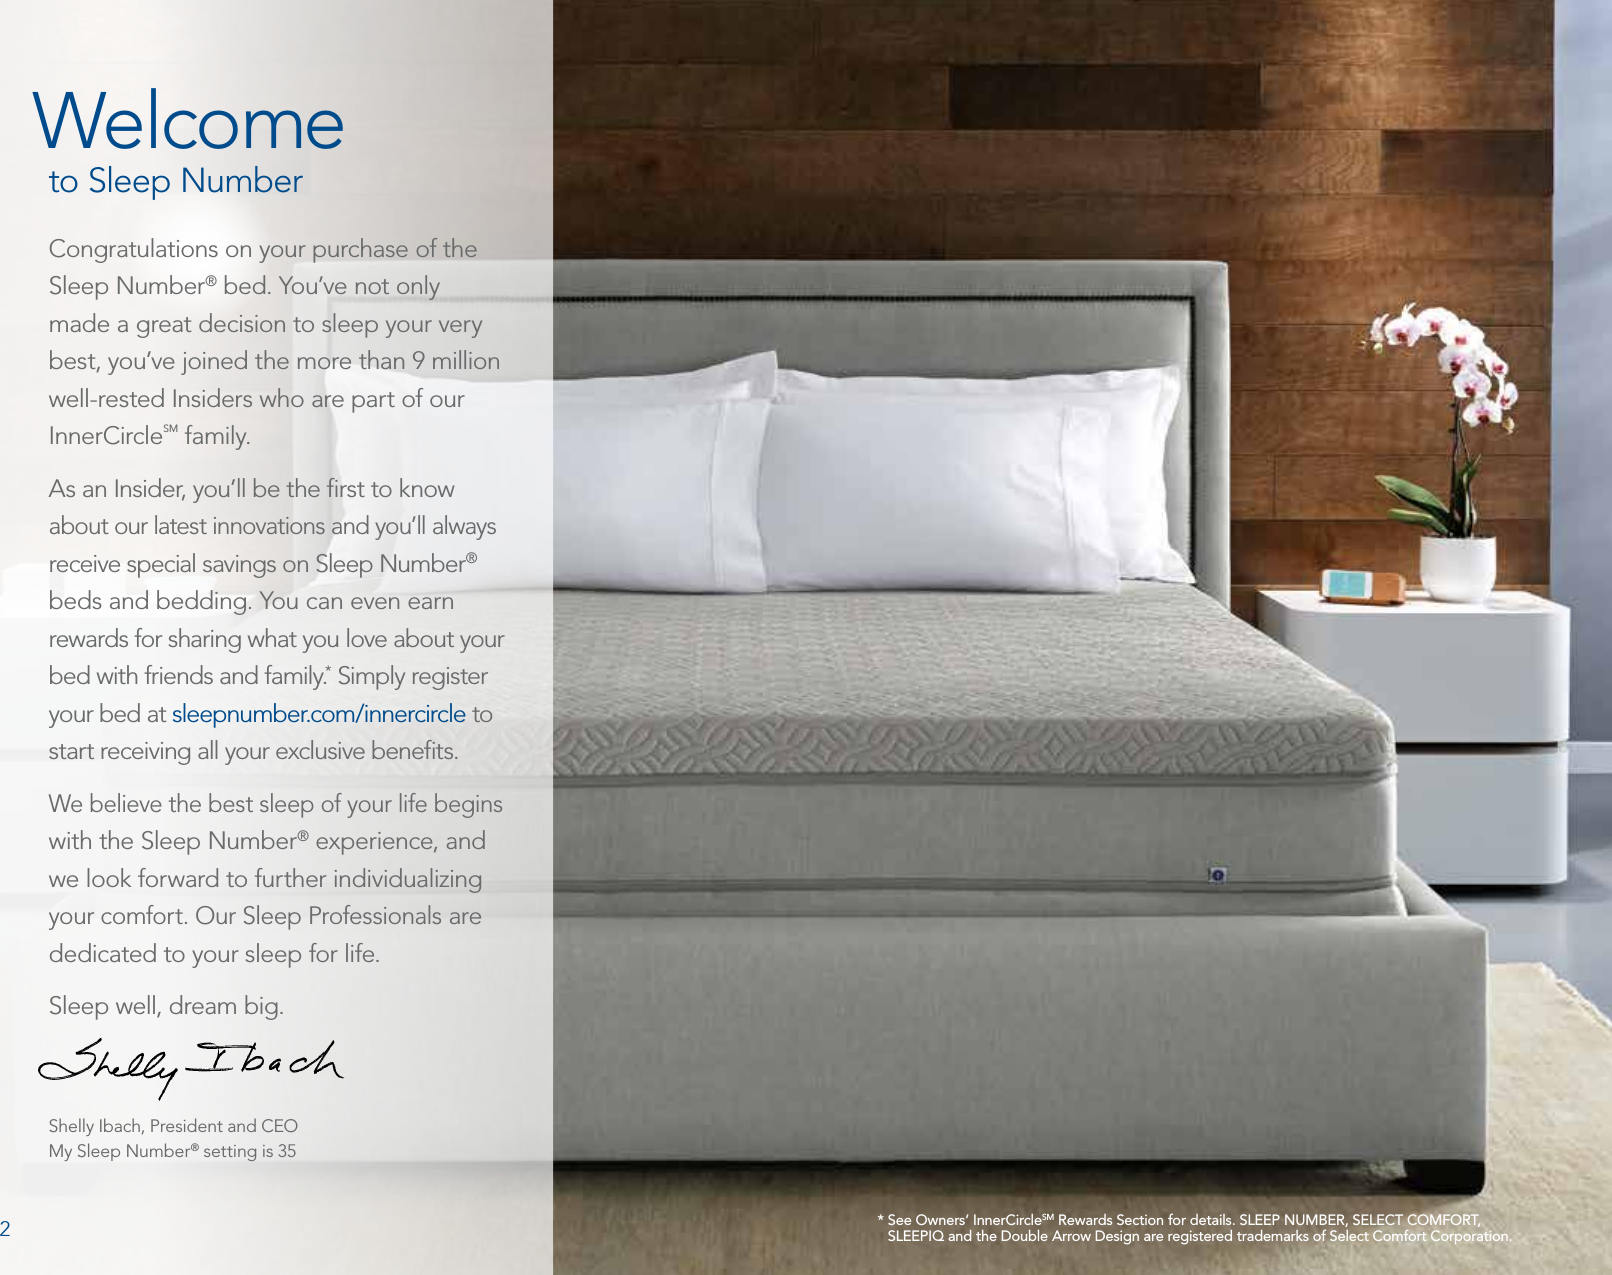 *  See Owners’ InnerCircleSM Rewards Section for details. SLEEP NUMBER, SELECT COMFORT, SLEEPIQ and the Double Arrow Design are registered trademarks of Select Comfort Corporation.WelcomeCongratulations on your purchase of the Sleep Number® bed. You’ve not only made a great decision to sleep your very best, you’ve joined the more than 9 million well-rested Insiders who are part of our InnerCircleSM family.As an Insider, you’ll be the ﬁrst to know about our latest innovations and you’ll always receive special savings on Sleep Number® beds and bedding. You can even earn rewards for sharing what you love about your bed with friends and family.* Simply register your bed at sleepnumber.com/innercircle to start receiving all your exclusive beneﬁts.We believe the best sleep of your life begins with the Sleep Number® experience, and we look forward to further individualizing your comfort. Our Sleep Professionals are dedicated to your sleep for life.Sleep well, dream big.Shelly Ibach, President and CEOMy Sleep Number® setting is 35to Sleep Number2